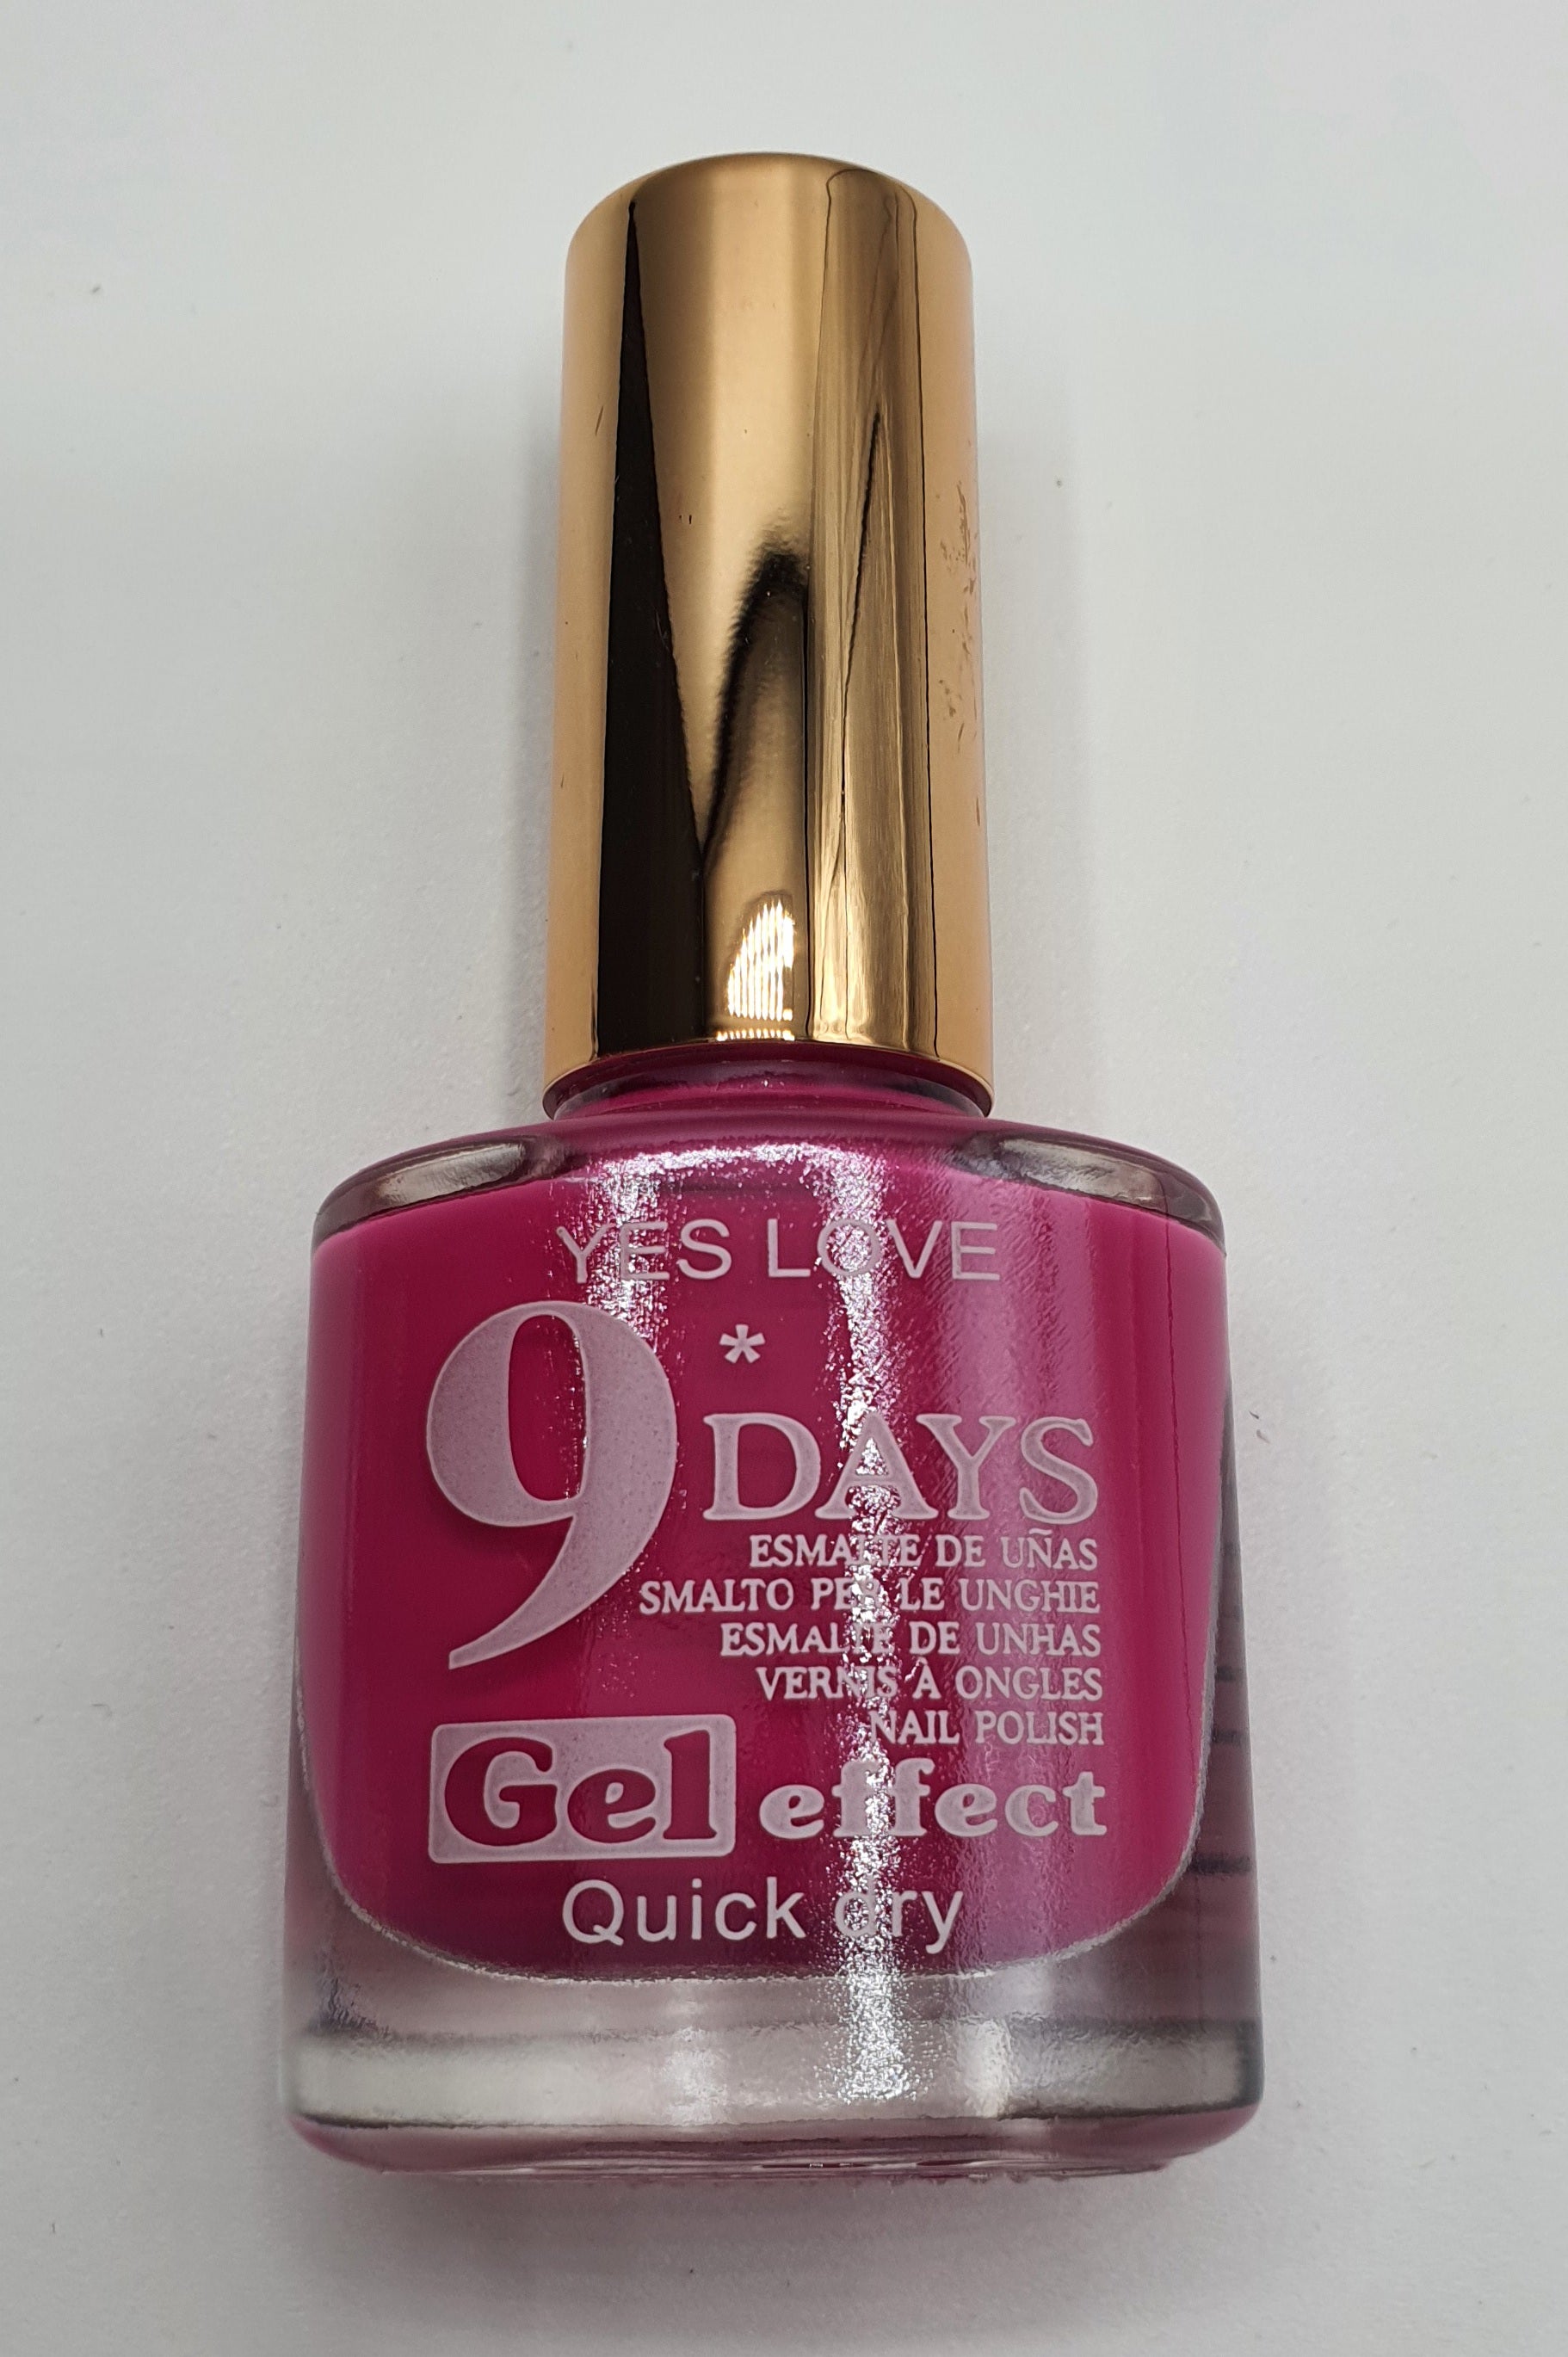 Vernis a ongle Yes love 9 jours ref: 27